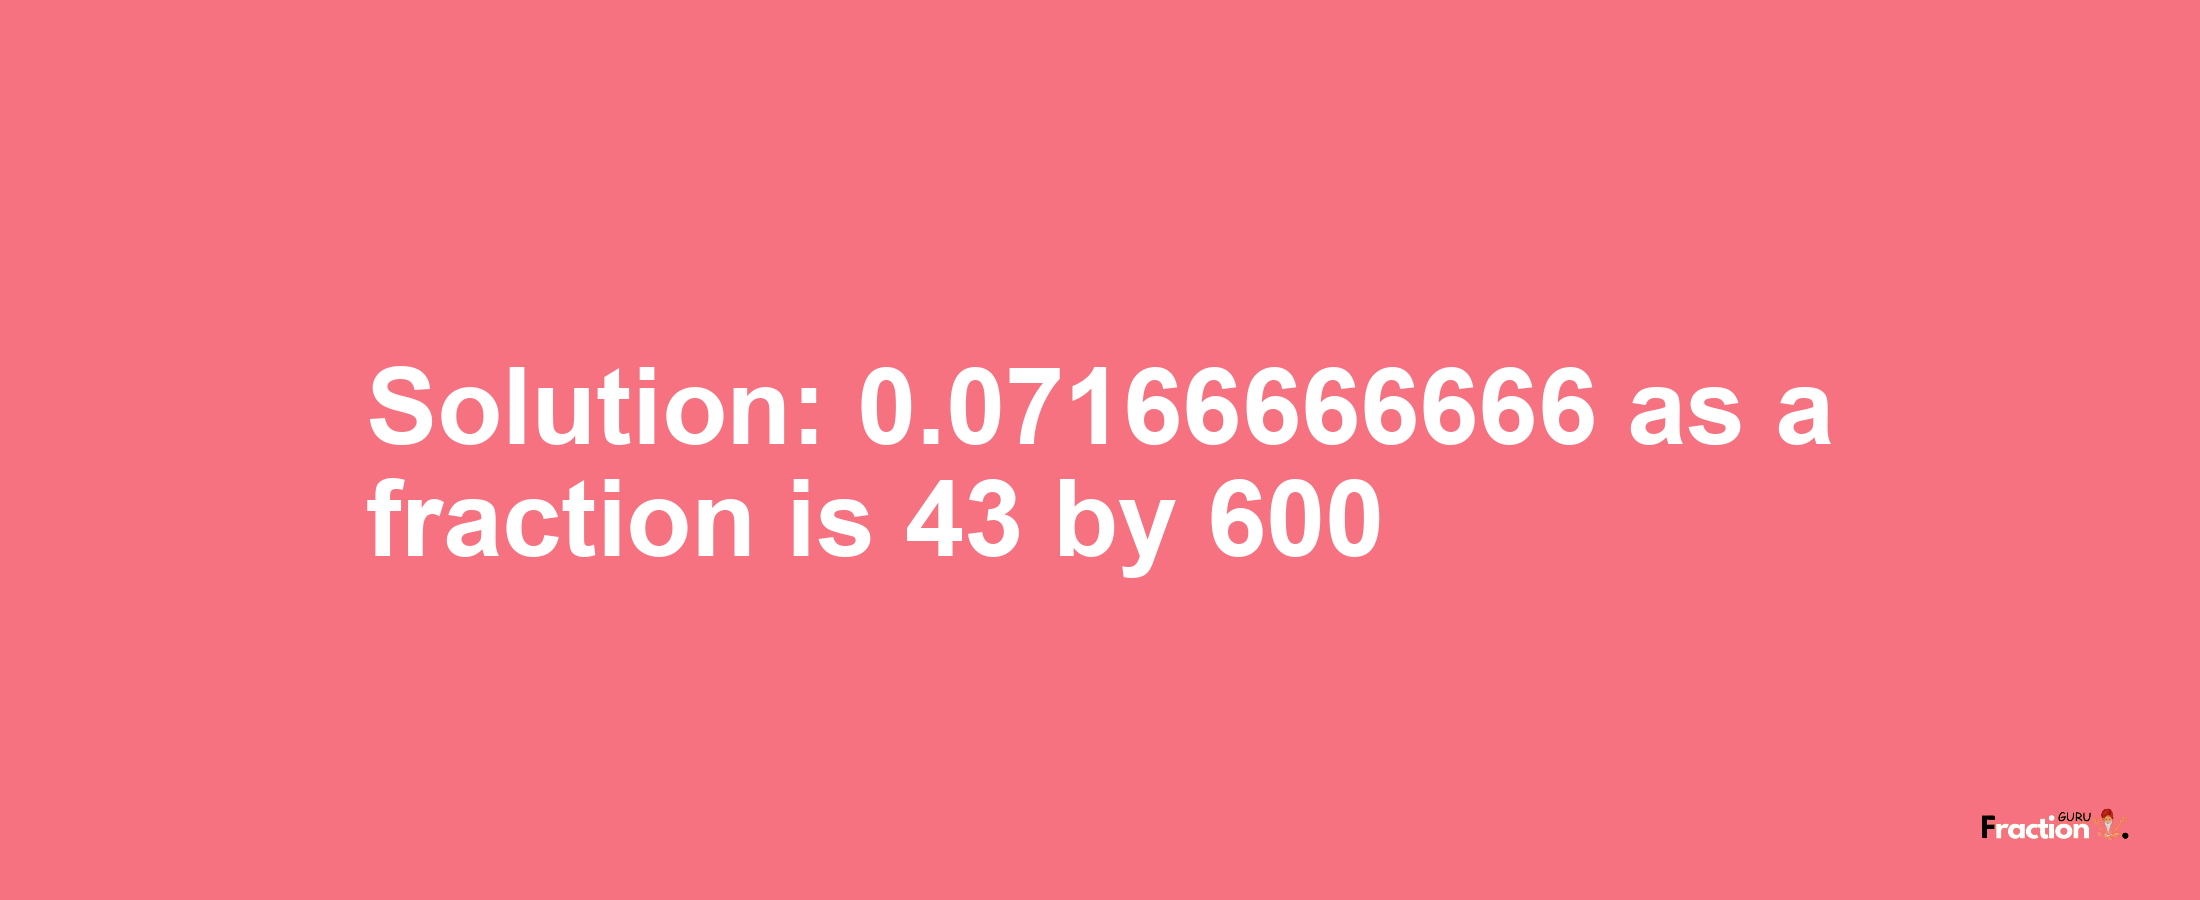 Solution:0.07166666666 as a fraction is 43/600